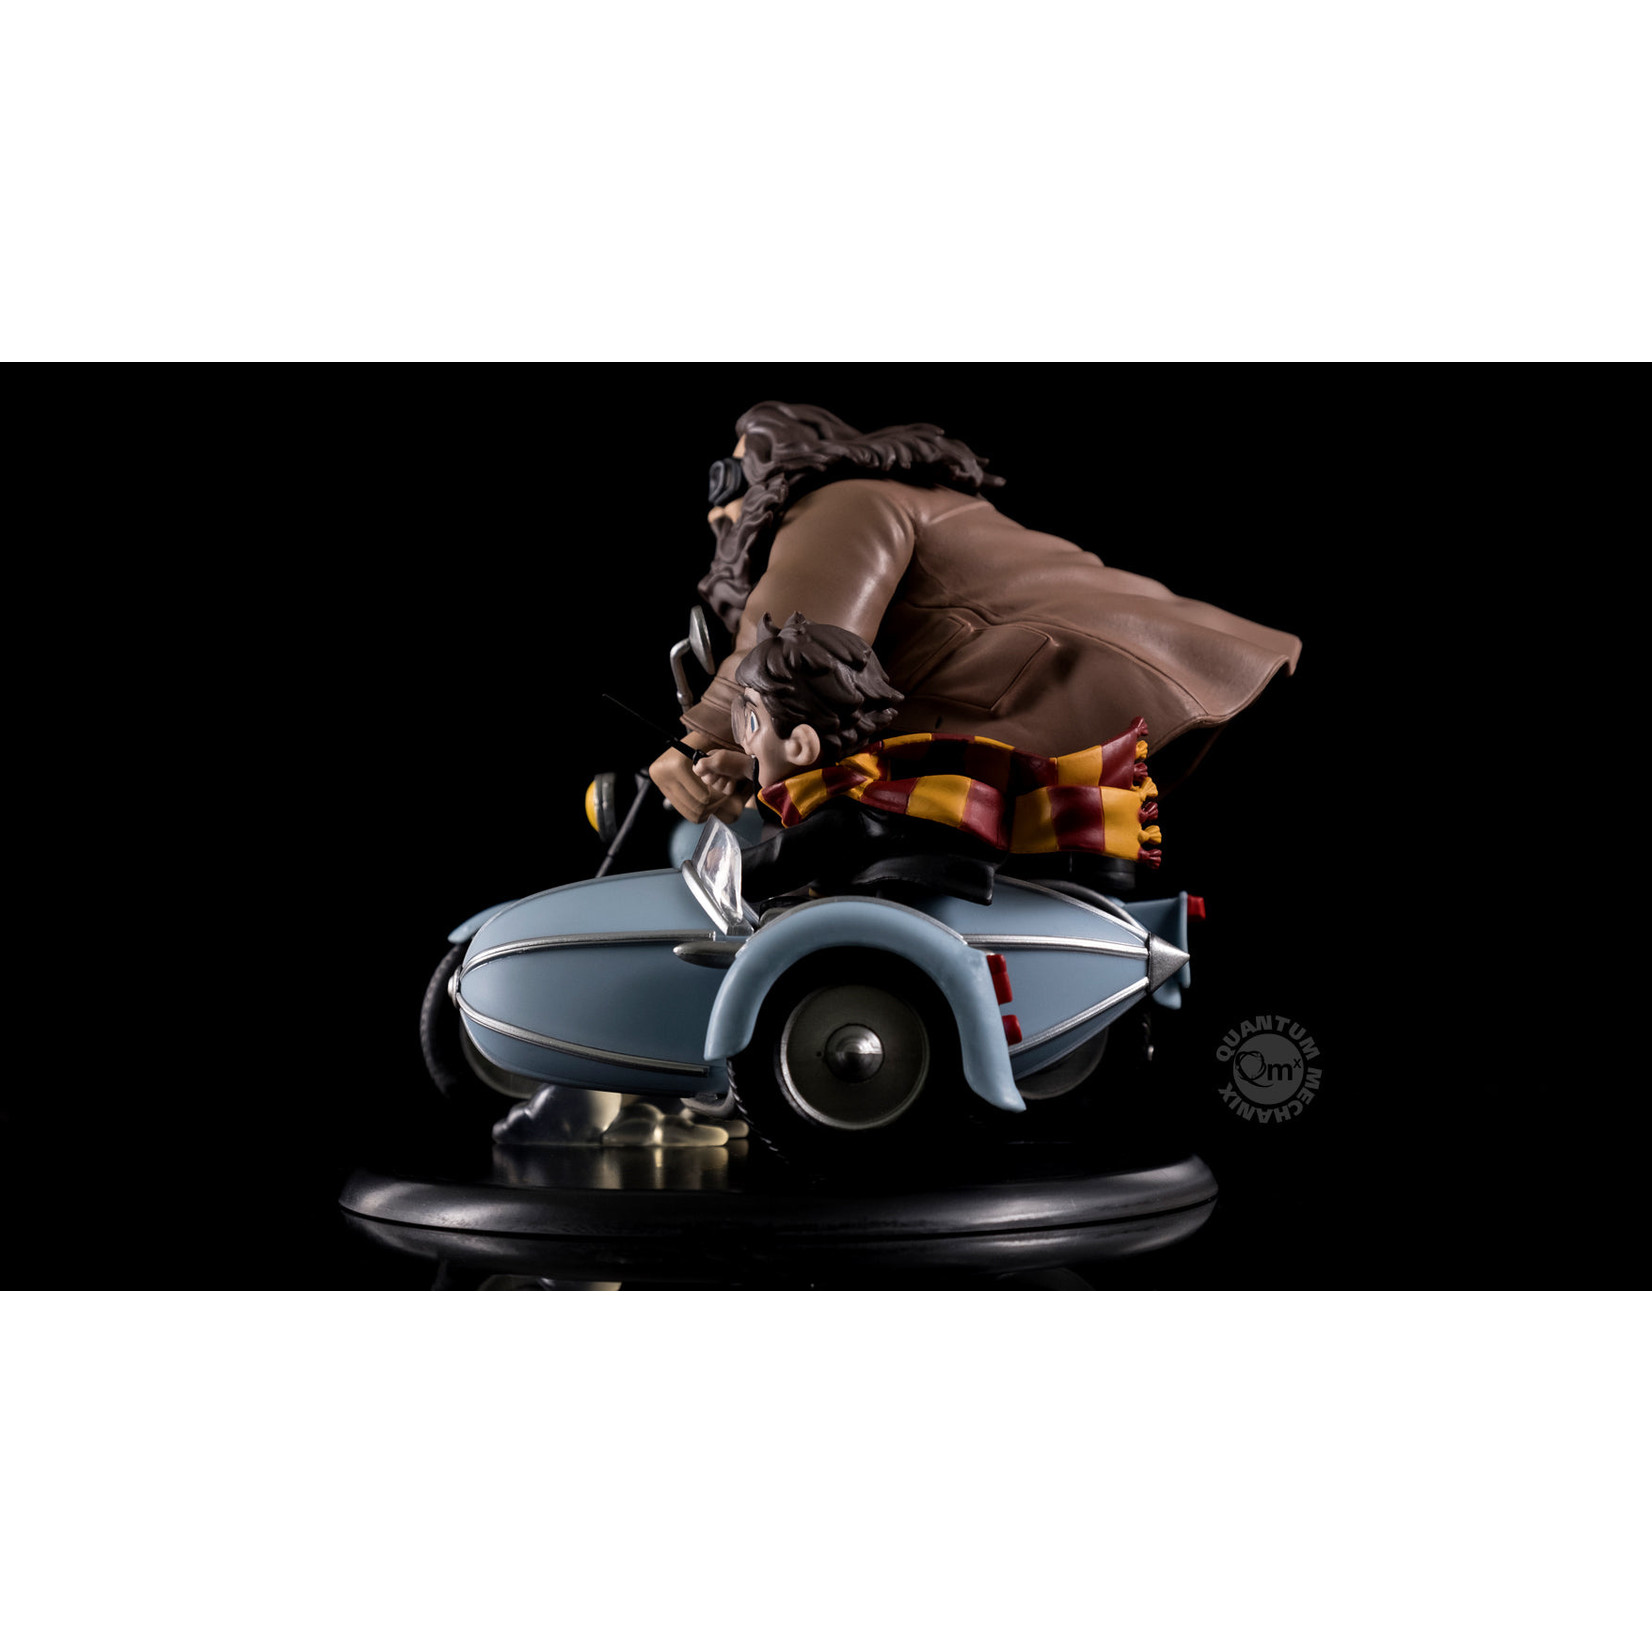 QMx Harry Potter and Rubeus Hagrid Limited Edition Q-Fig Max